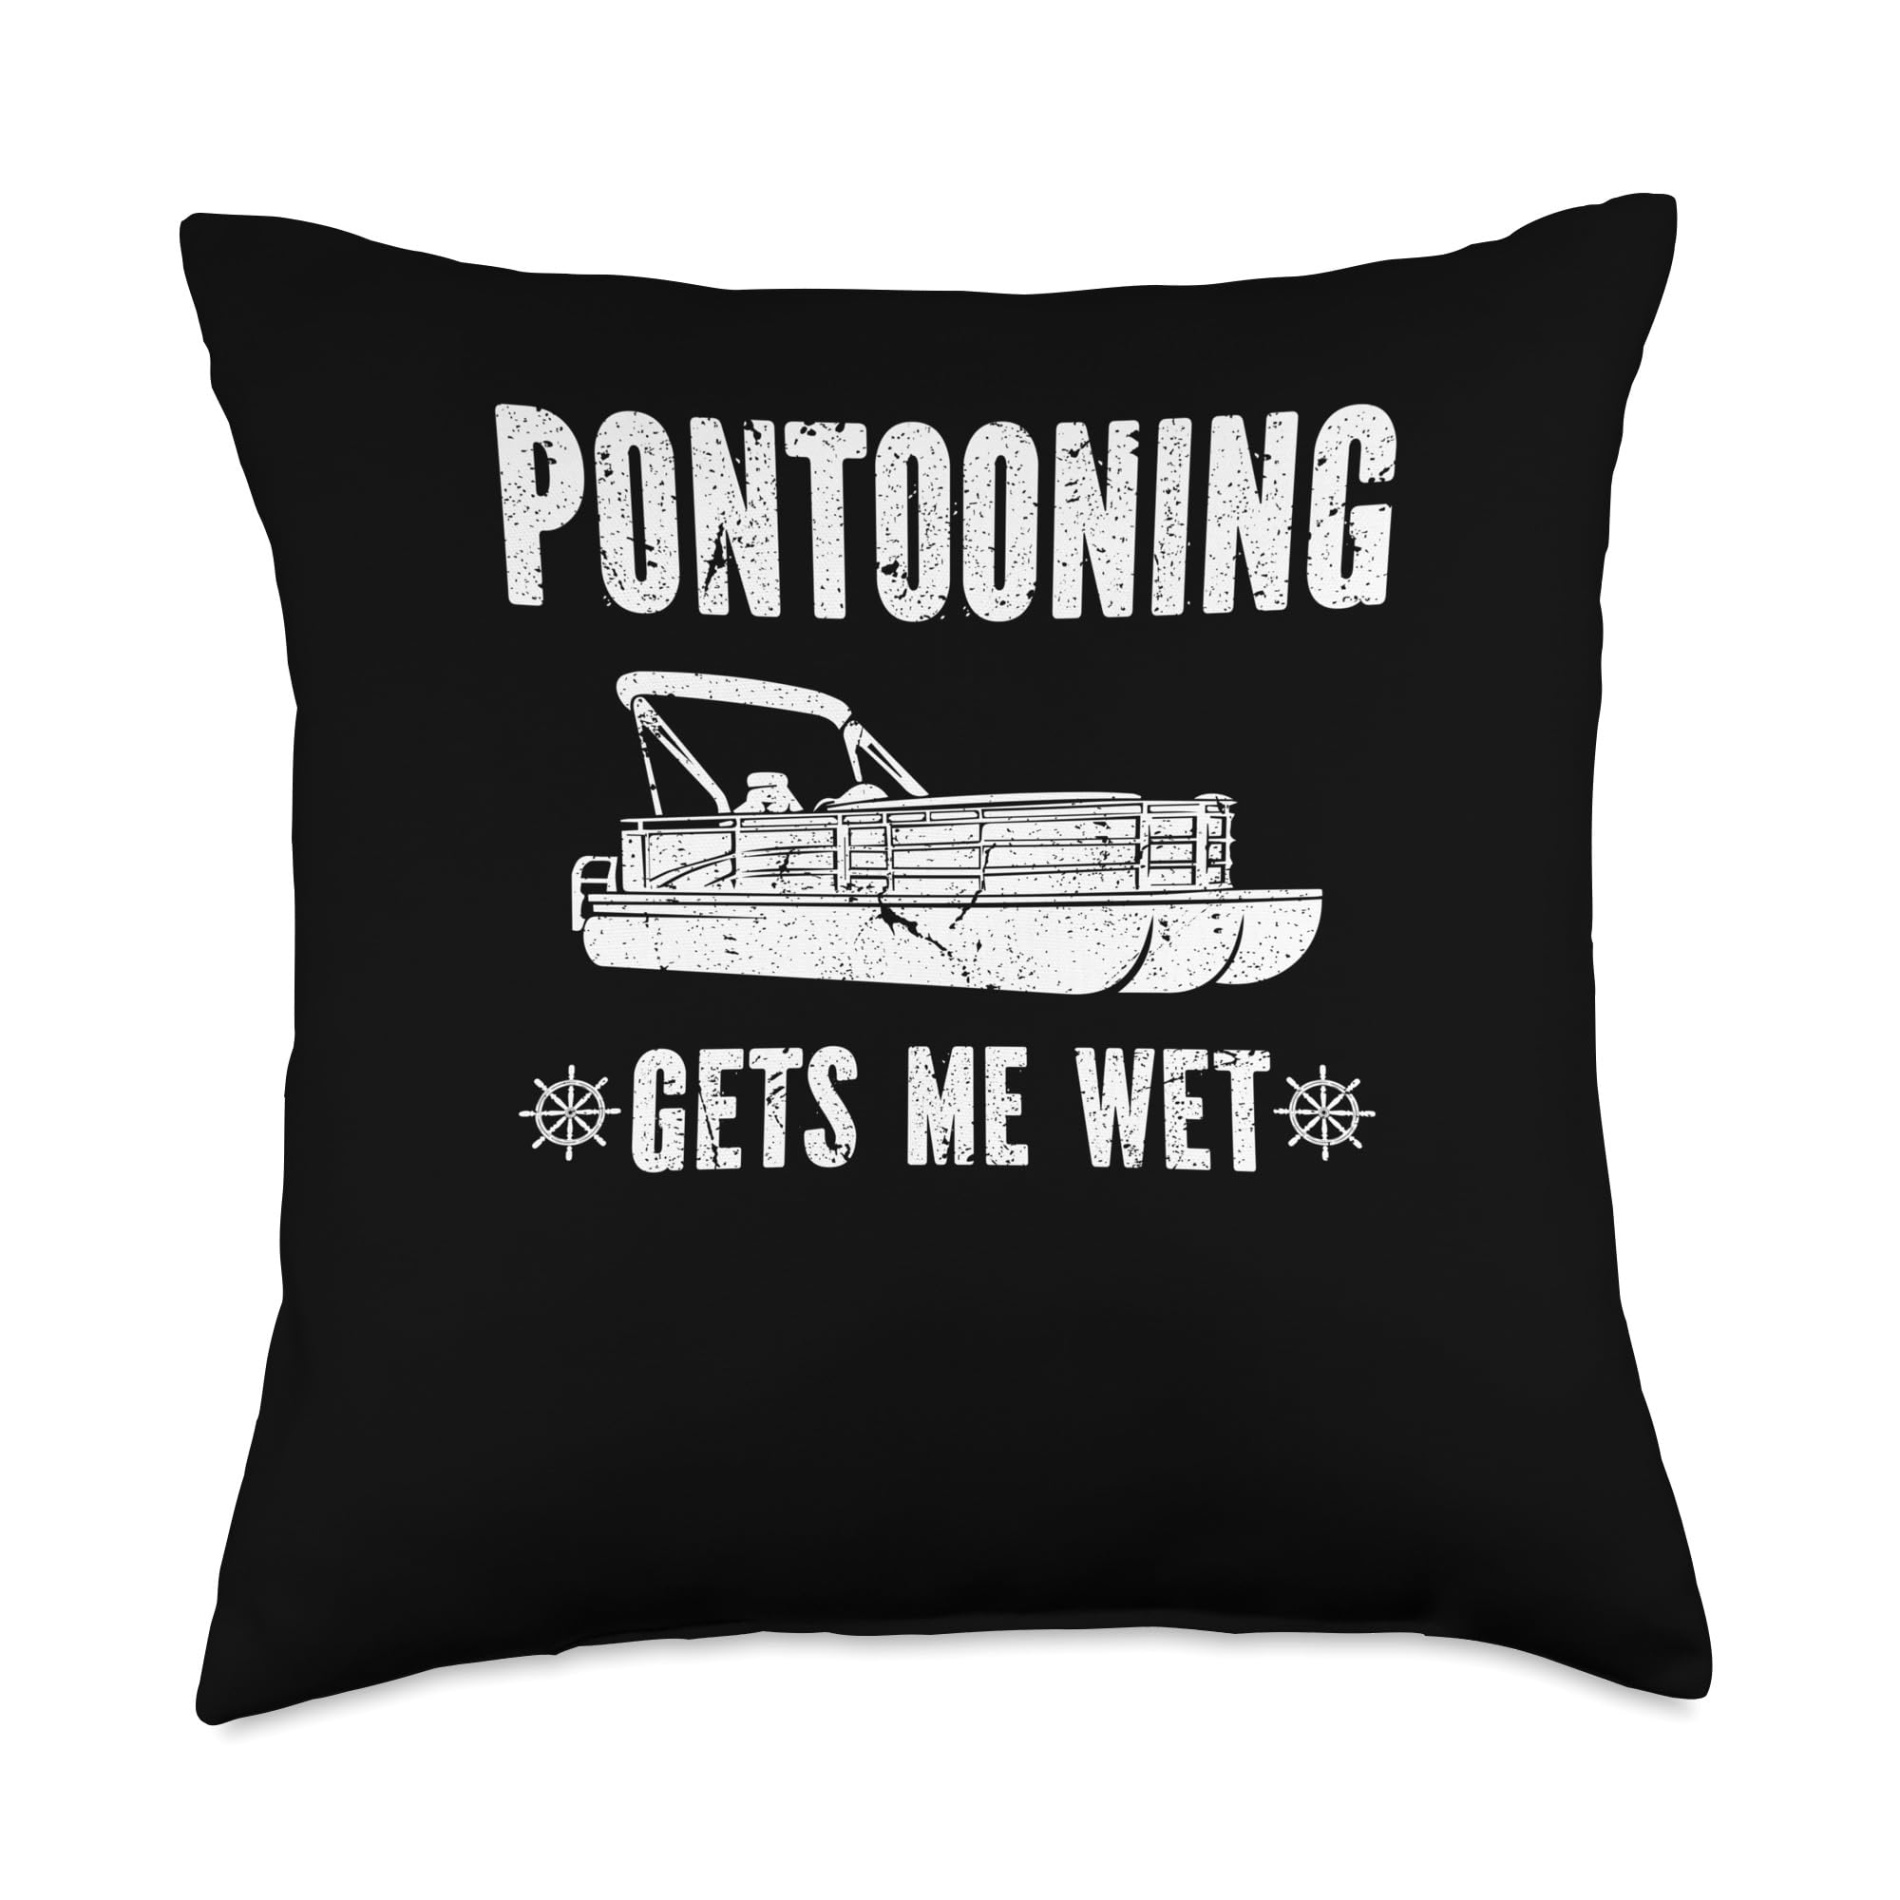 boating accessories near me Niche Utama Home Pontoon Boat Accessories & Pontoon Boating Gifts Gets Me Wet, Funny Pontoon  Boat Captain Throw Pillow, x, Multicolor